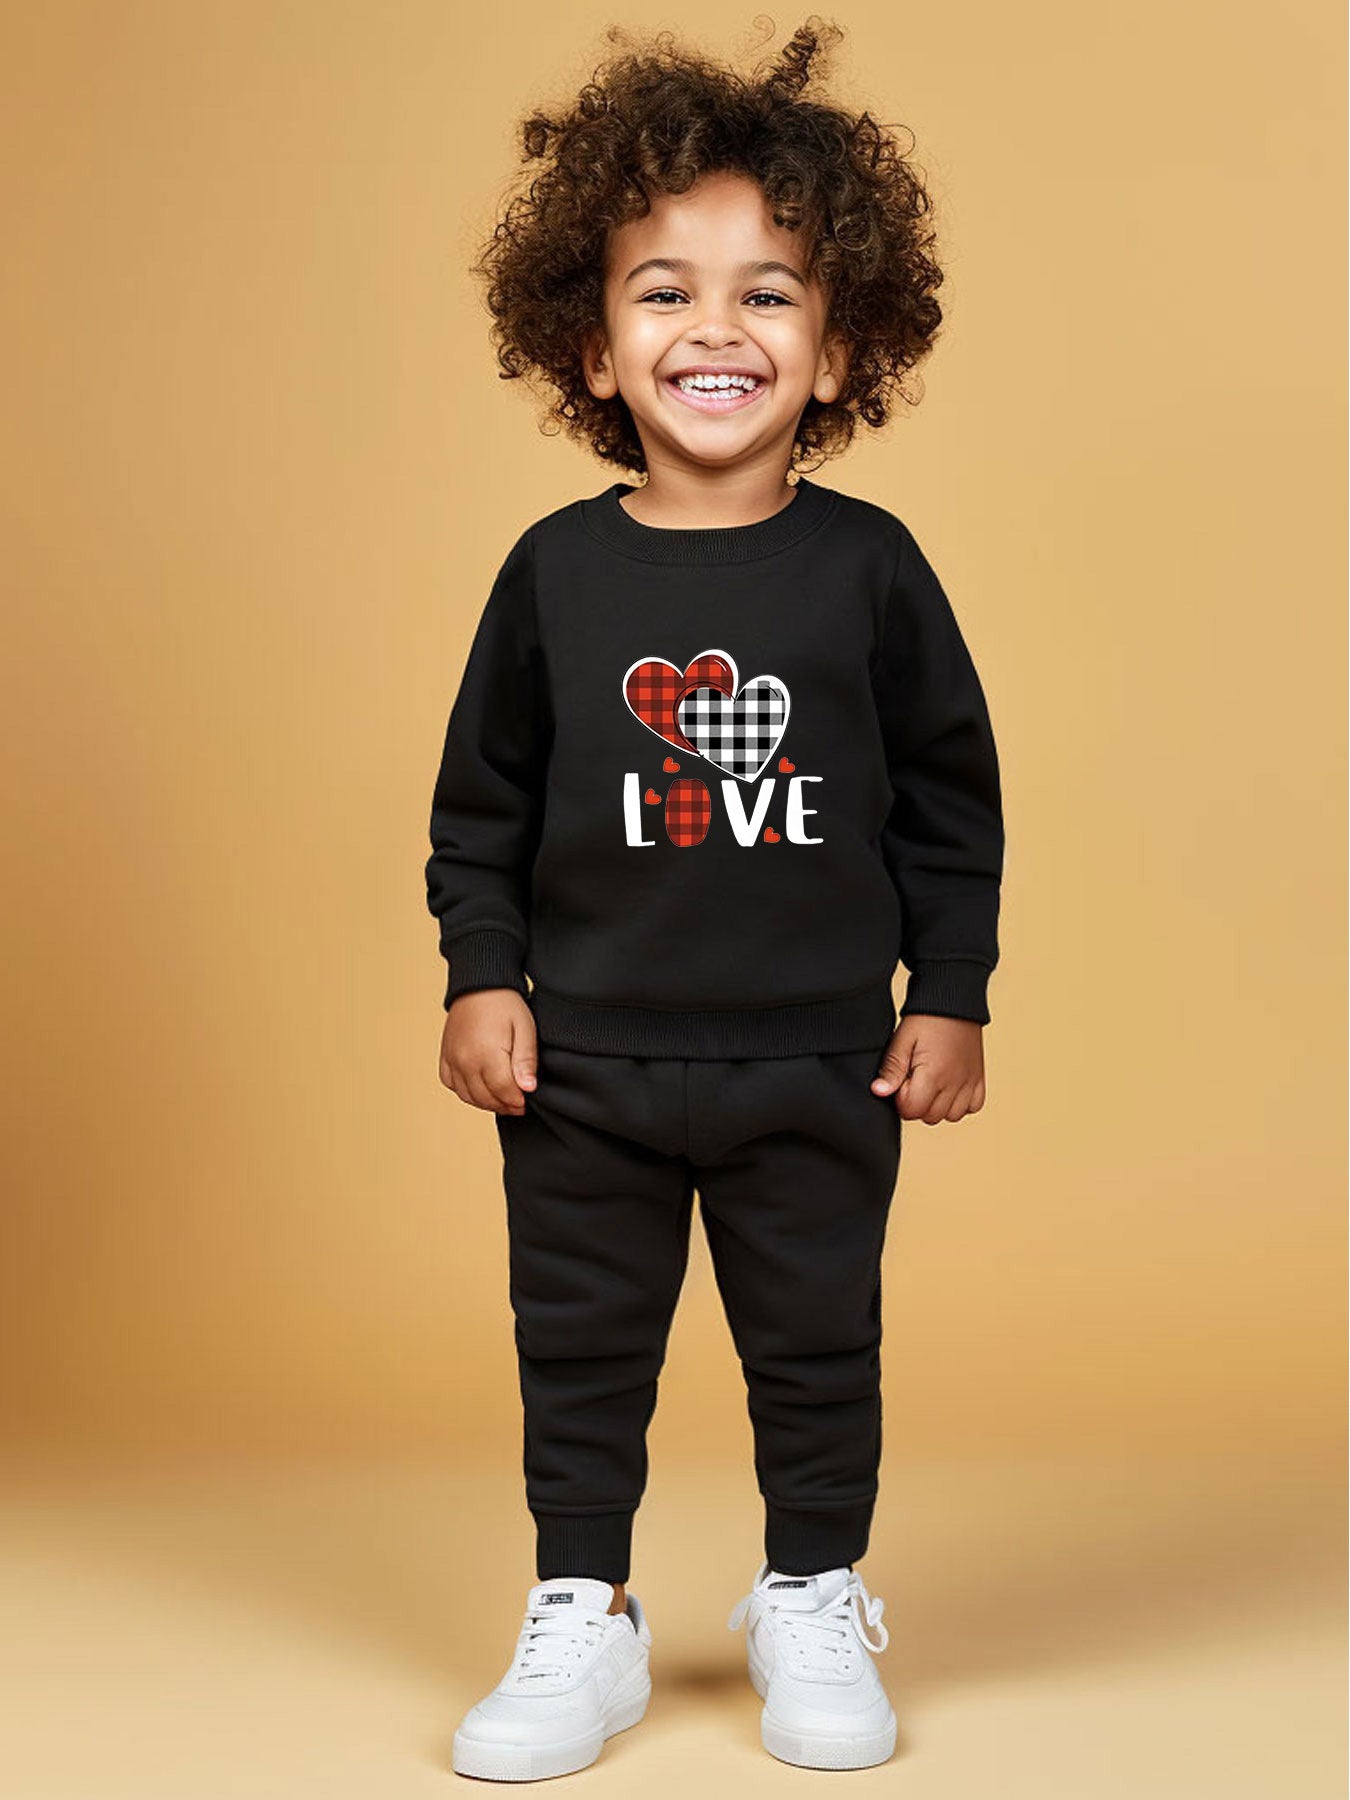 Love Youth Christian Casual Outfit claimedbygoddesigns